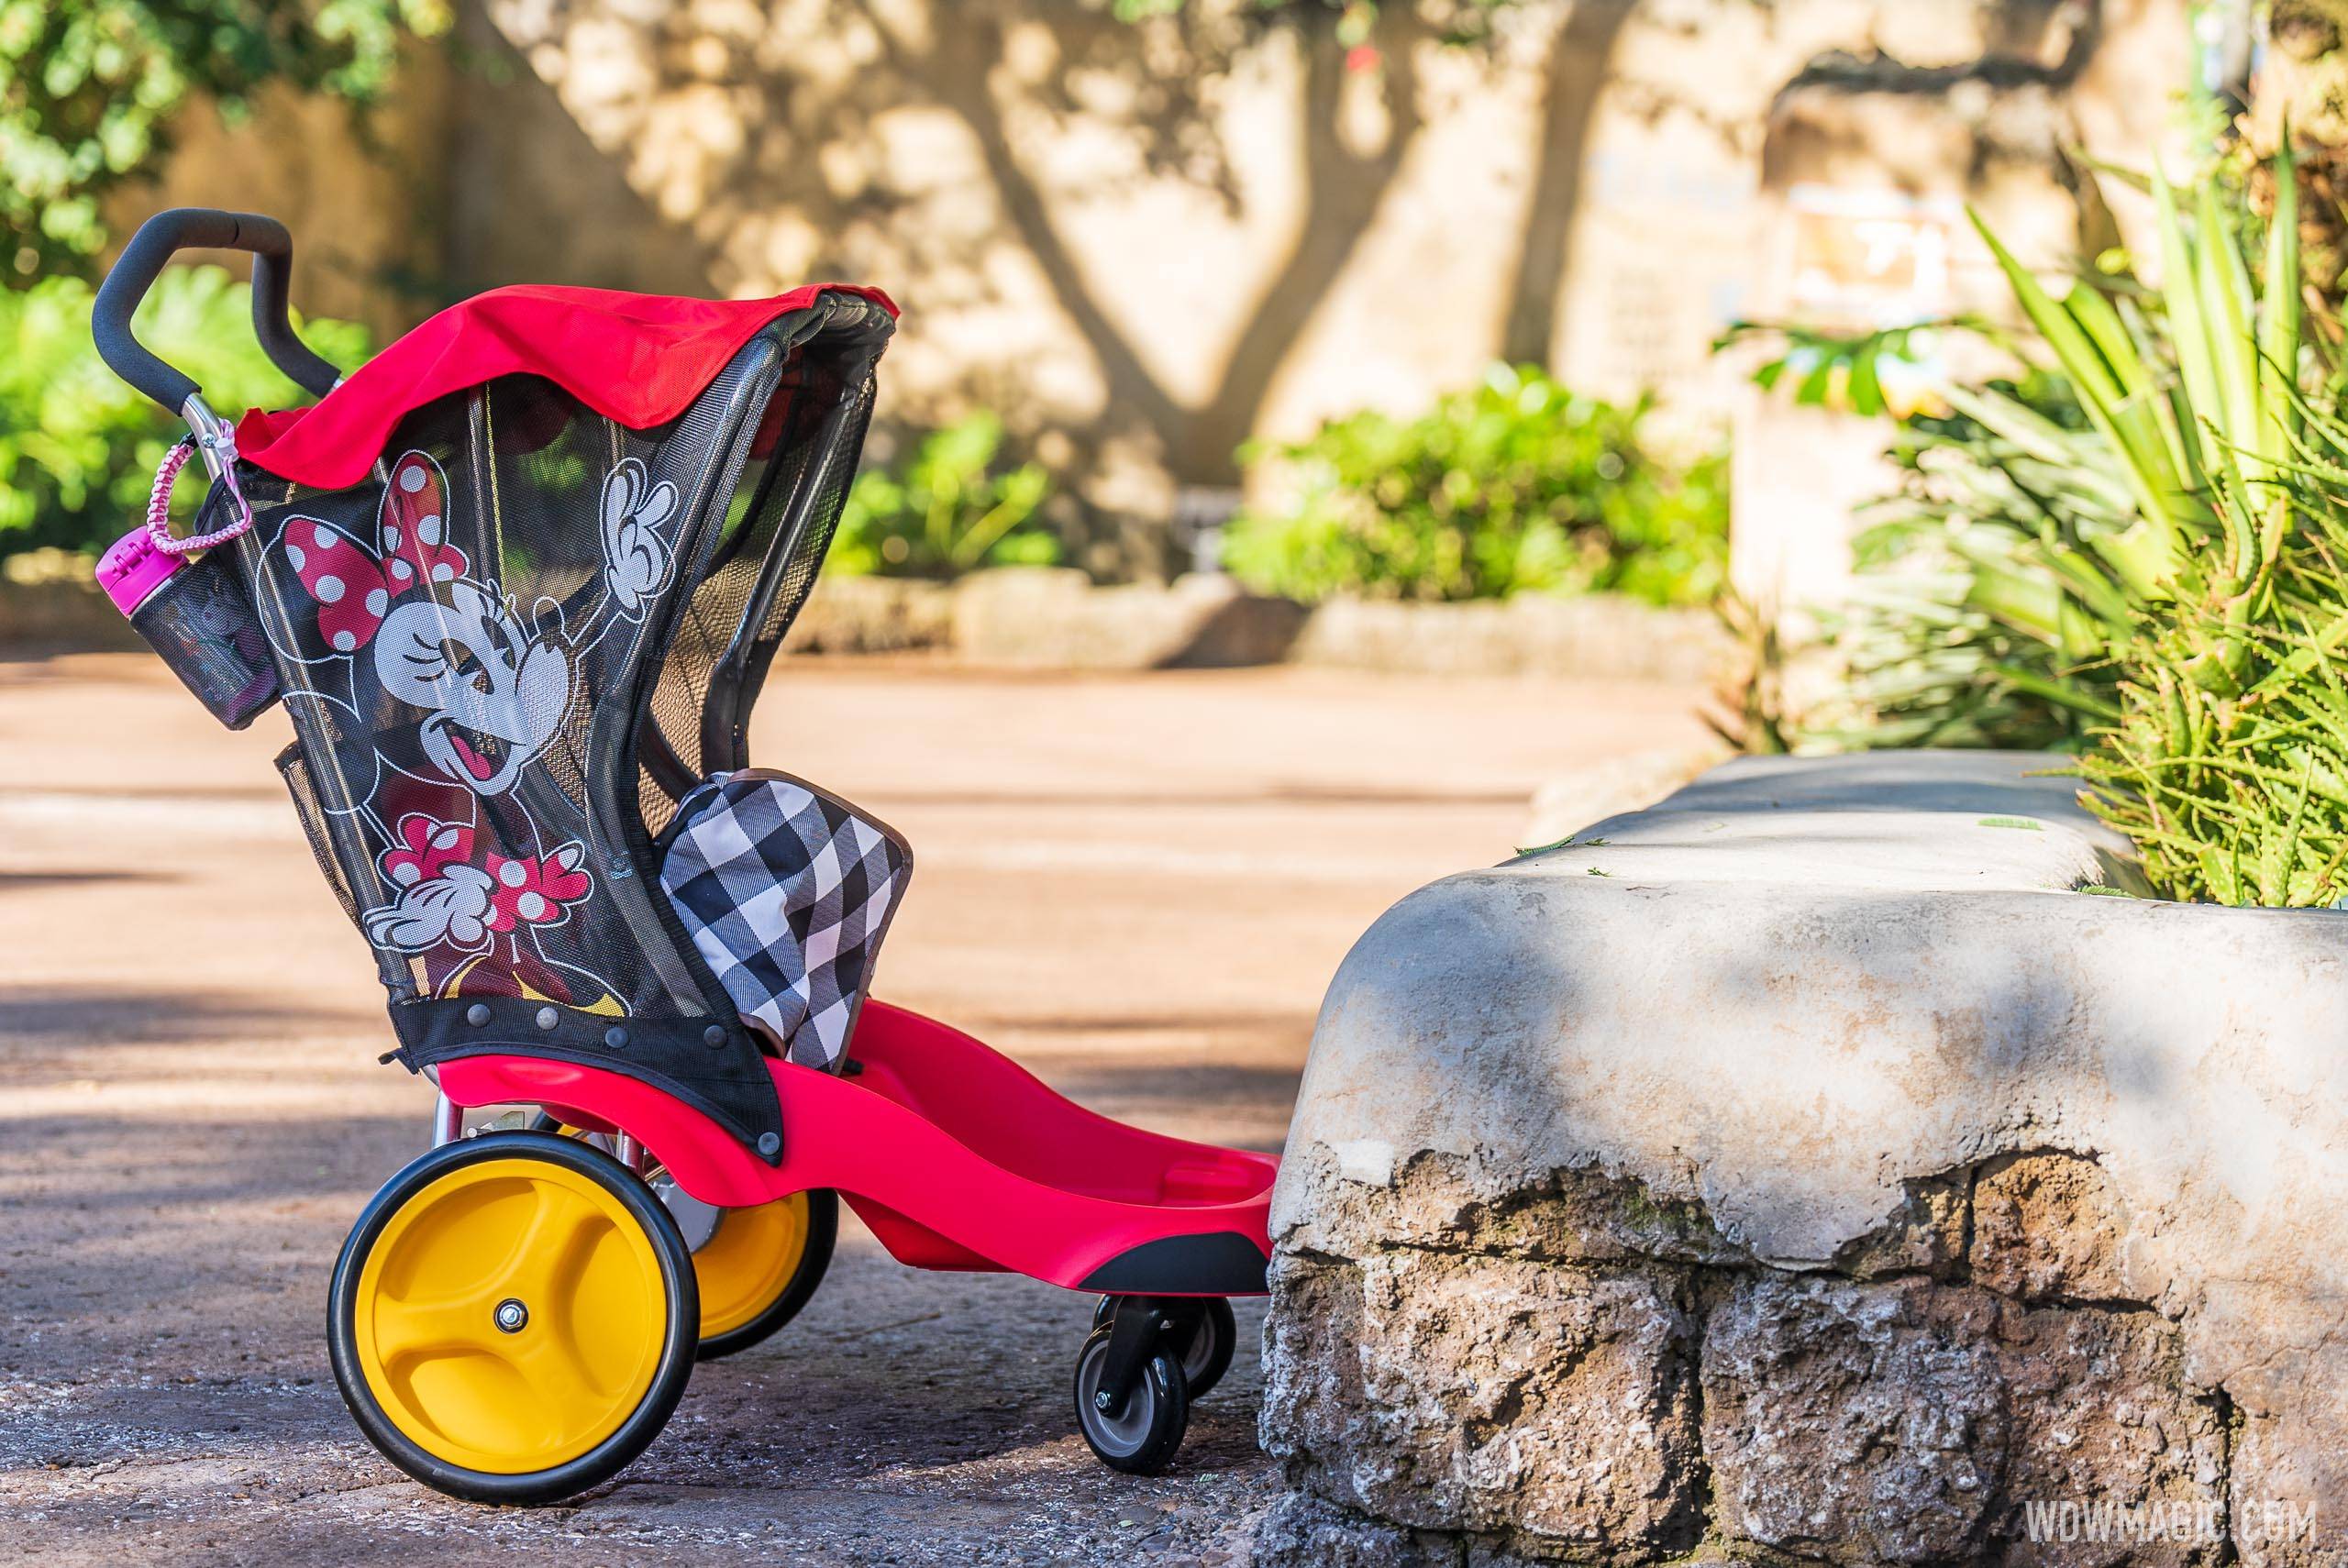 New Mickey Mouse and Minnie Mouse stroller rentals arrive at Walt Disney World